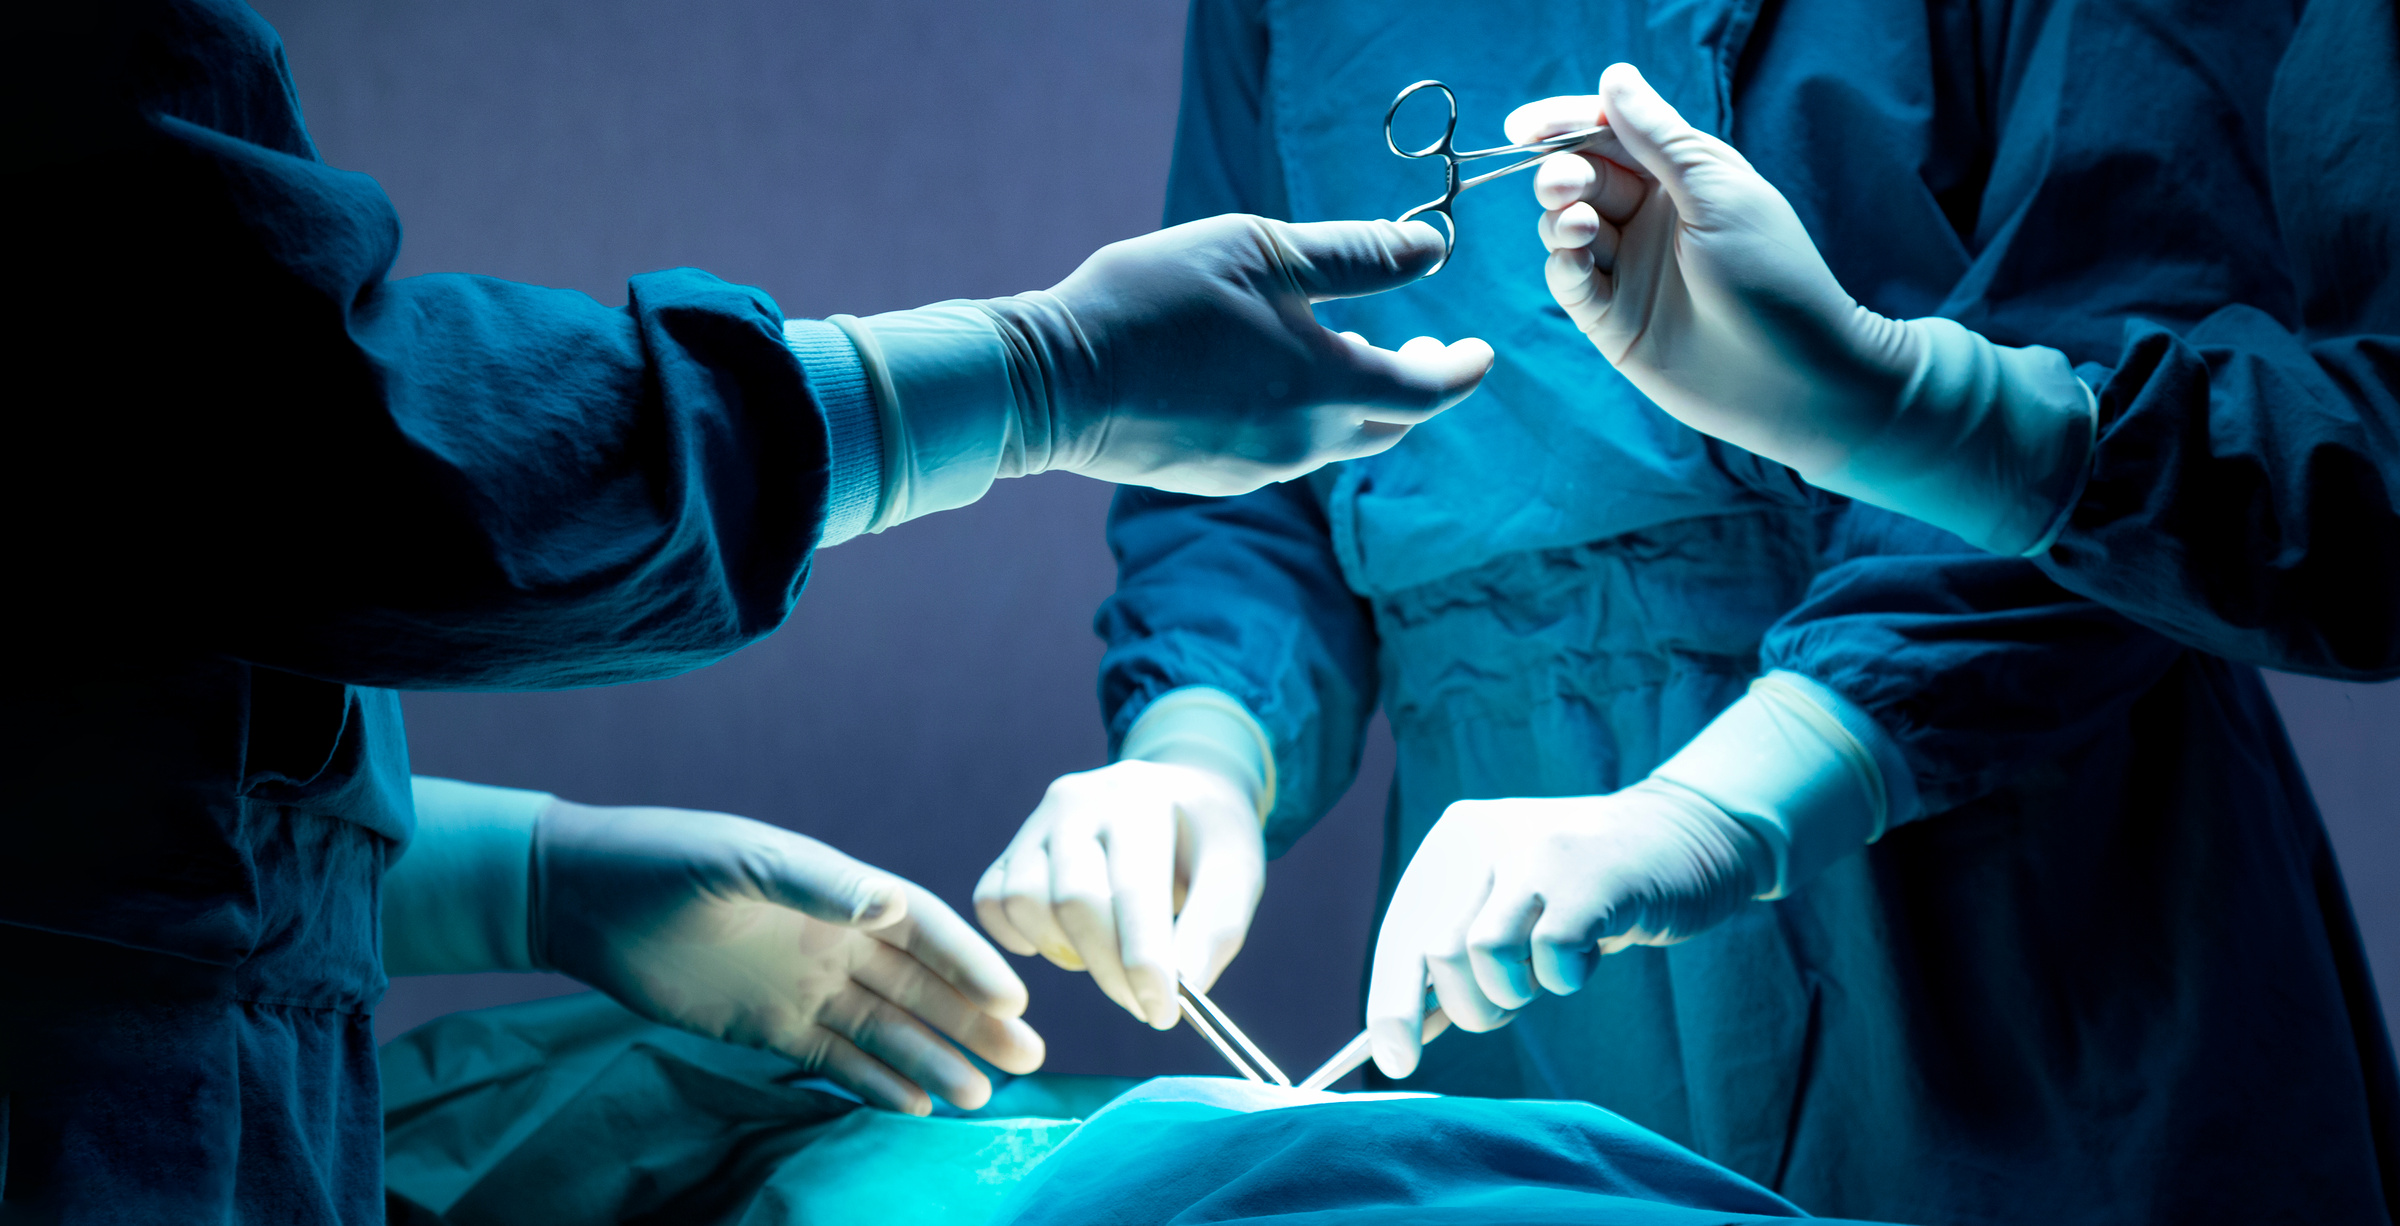 Surgeons Operating a Patient in the Operating Room